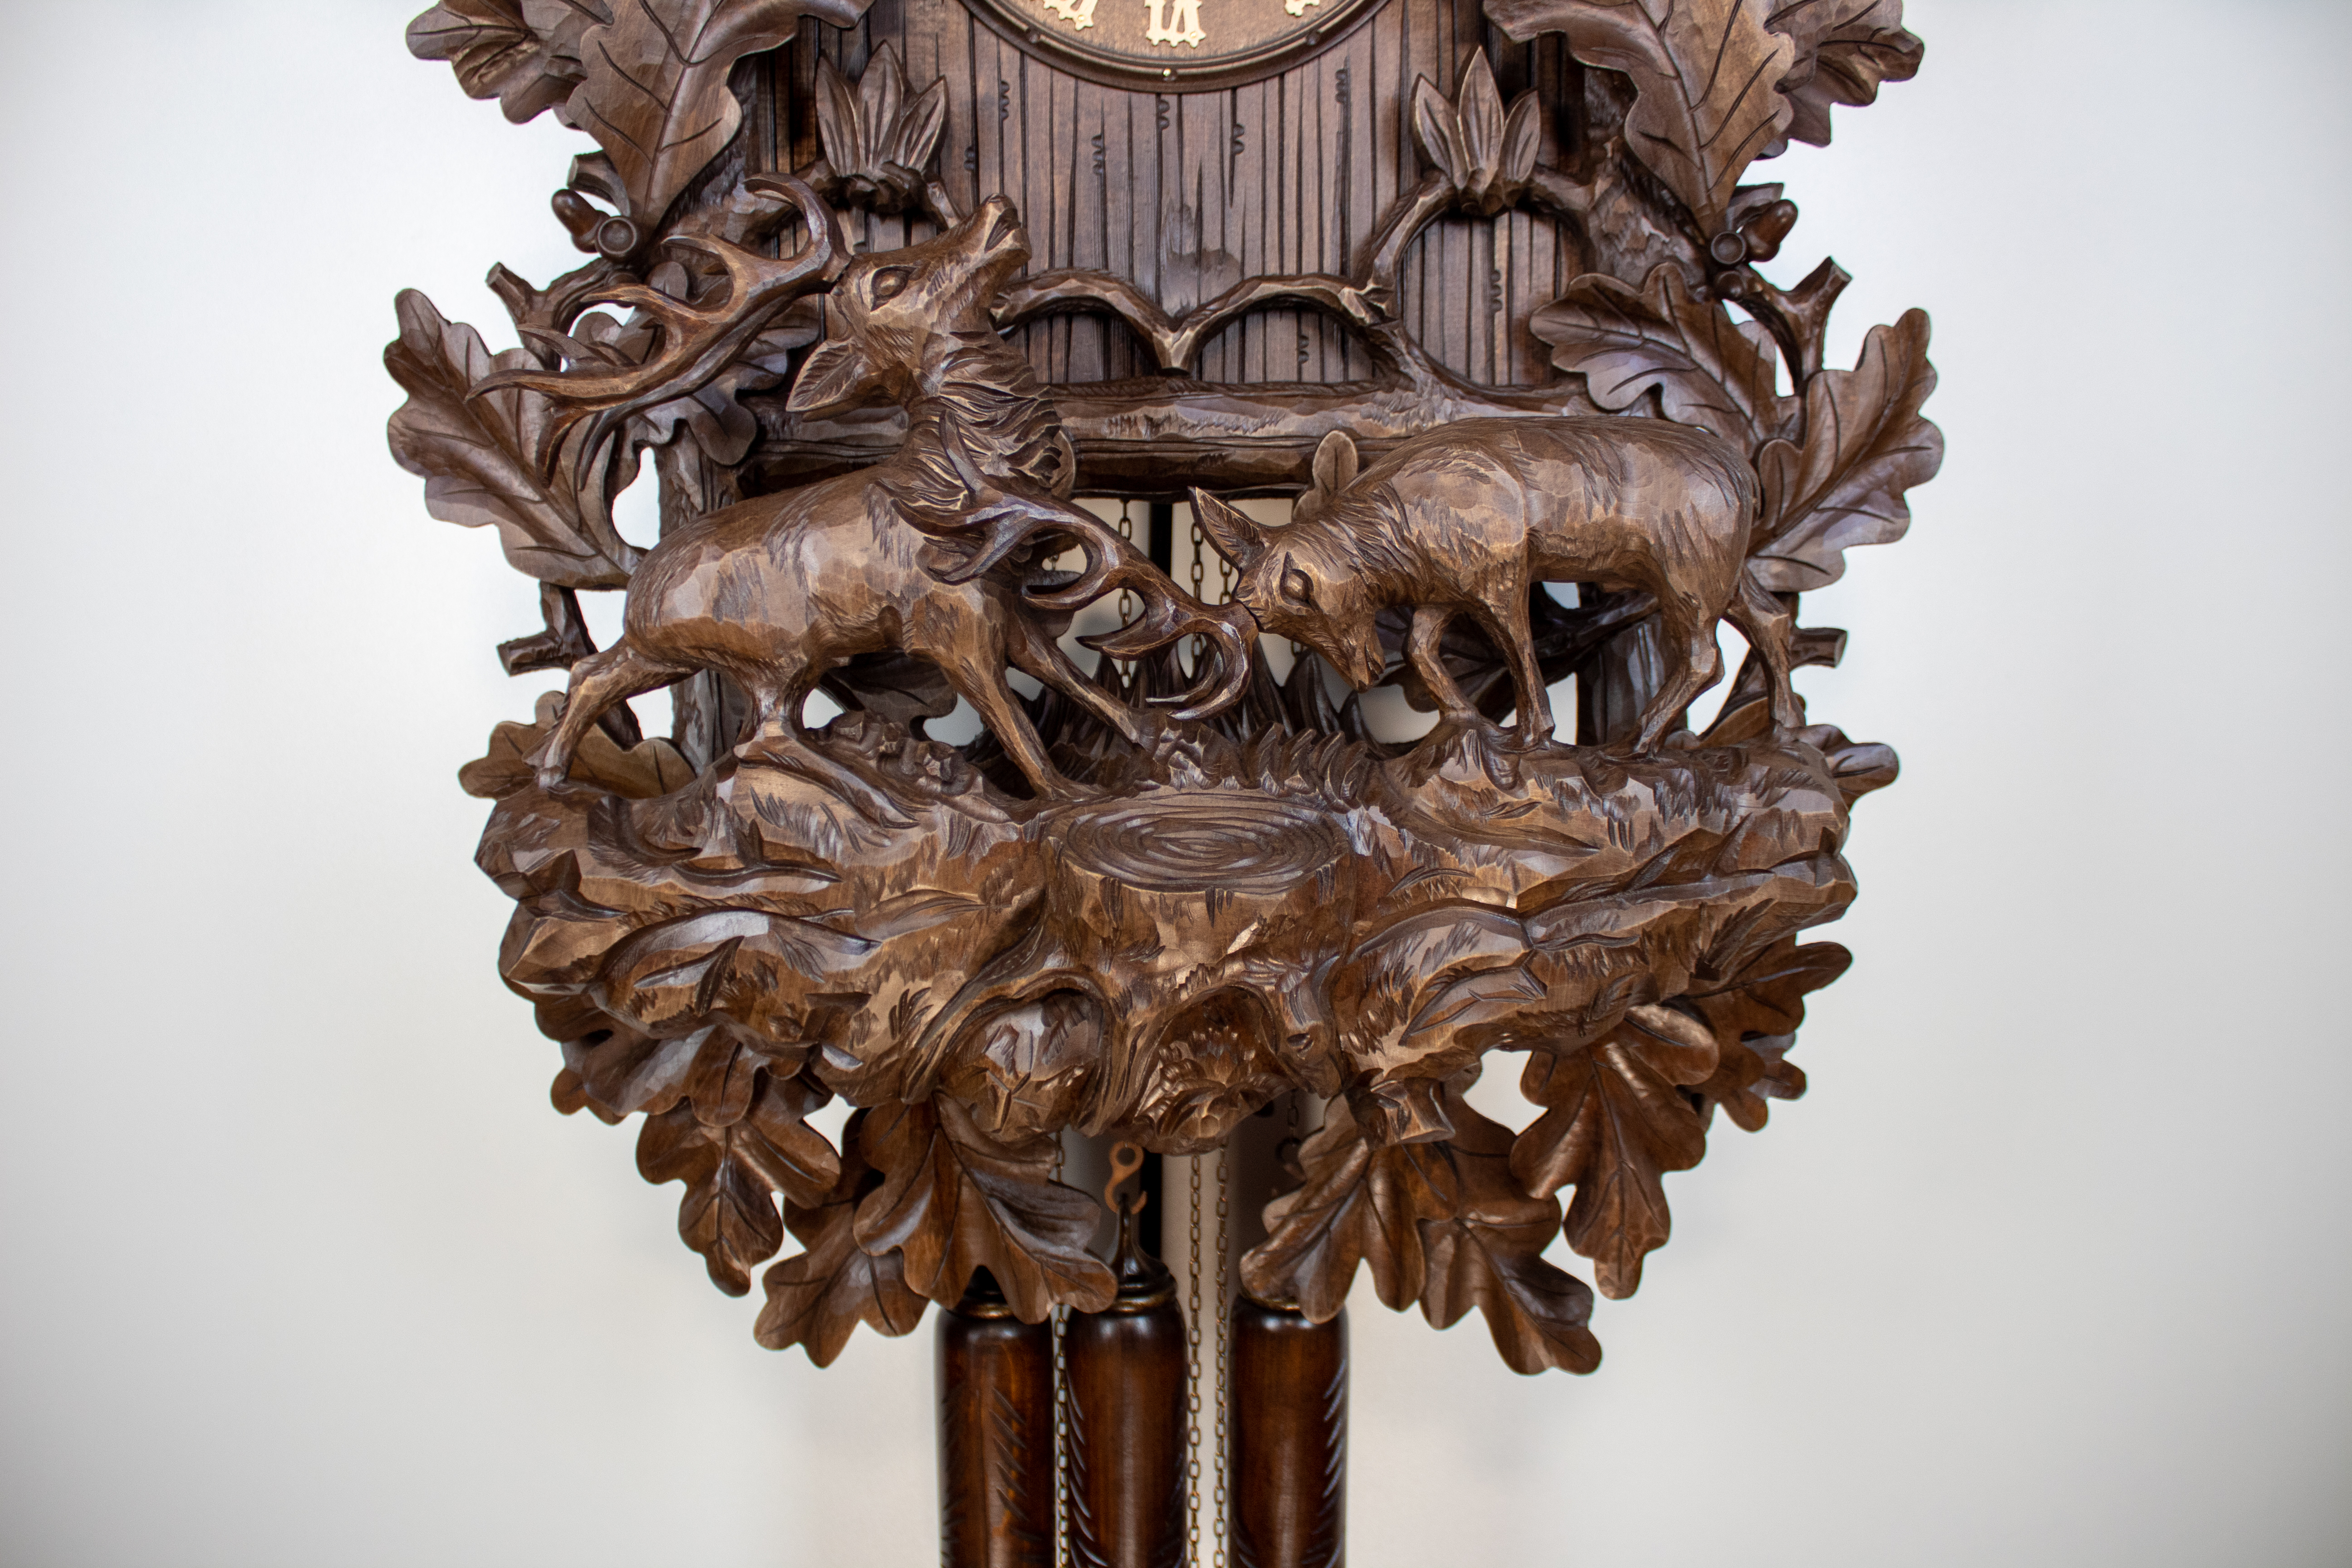 Historical 8 Days Music Dancer Cuckoo Clock with eagle and fighting deer 